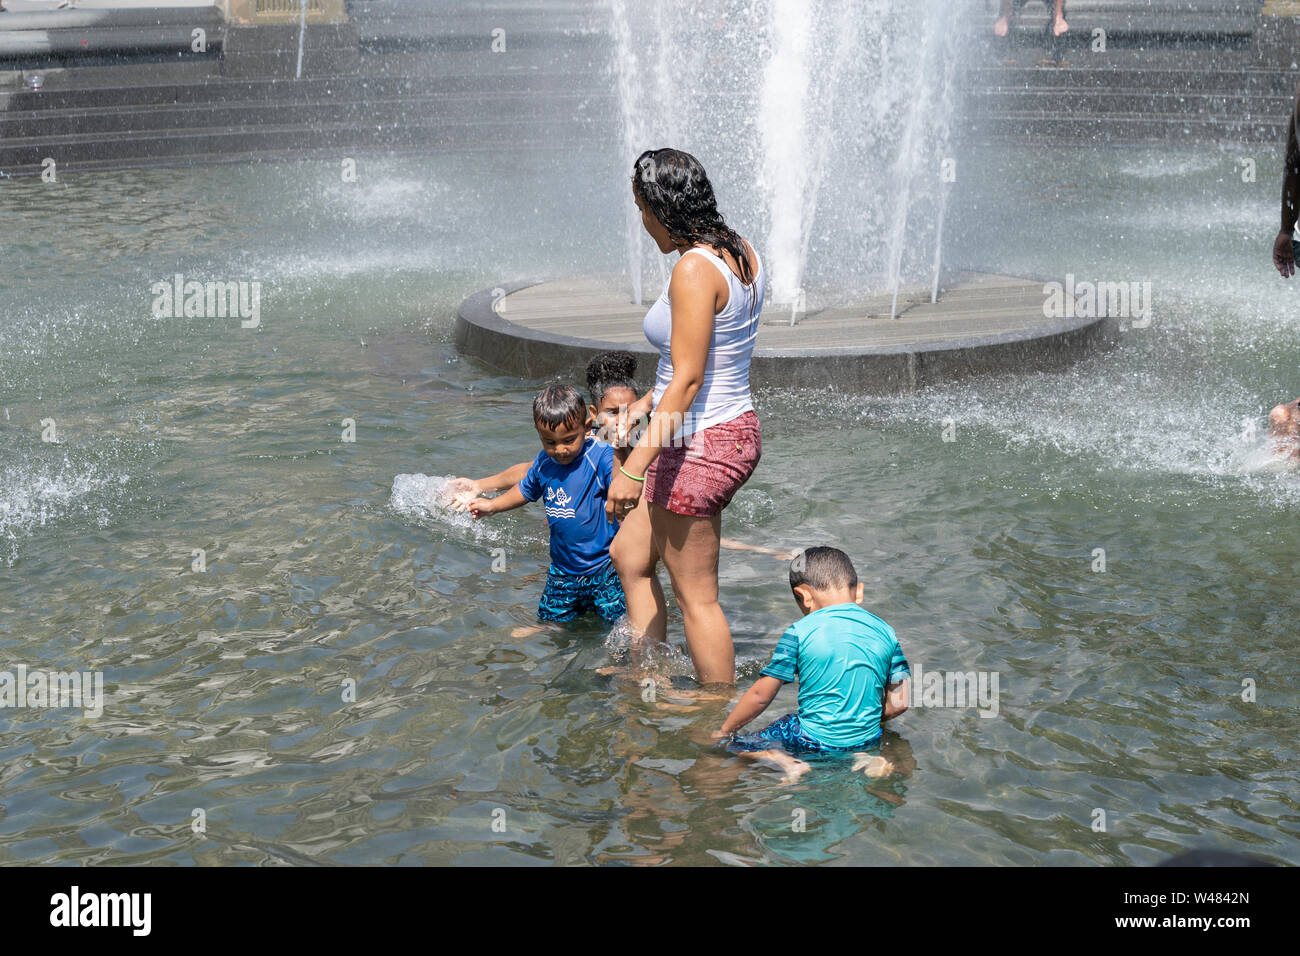 New York, NY - July 20, 2019: New Yorkers cool down in Washington Square fountain as extreme heat wave hit city and temperature reached 105 degrees Fahrenheit (40 degrees Celsius) Stock Photo